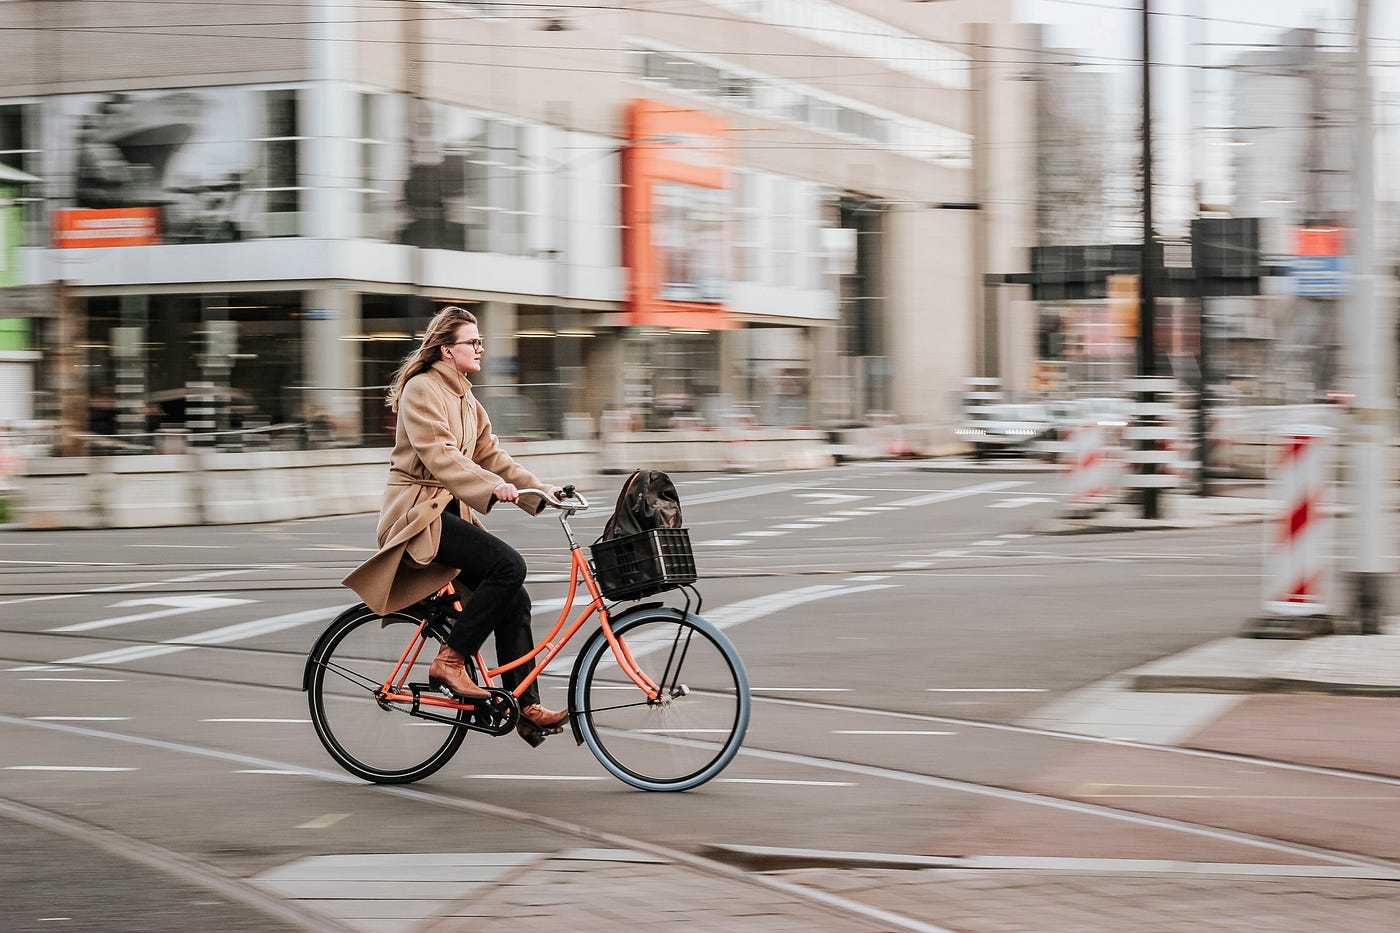 A woman rides an orange bike from left to right. Physical activity can reduce the risk of stroke.